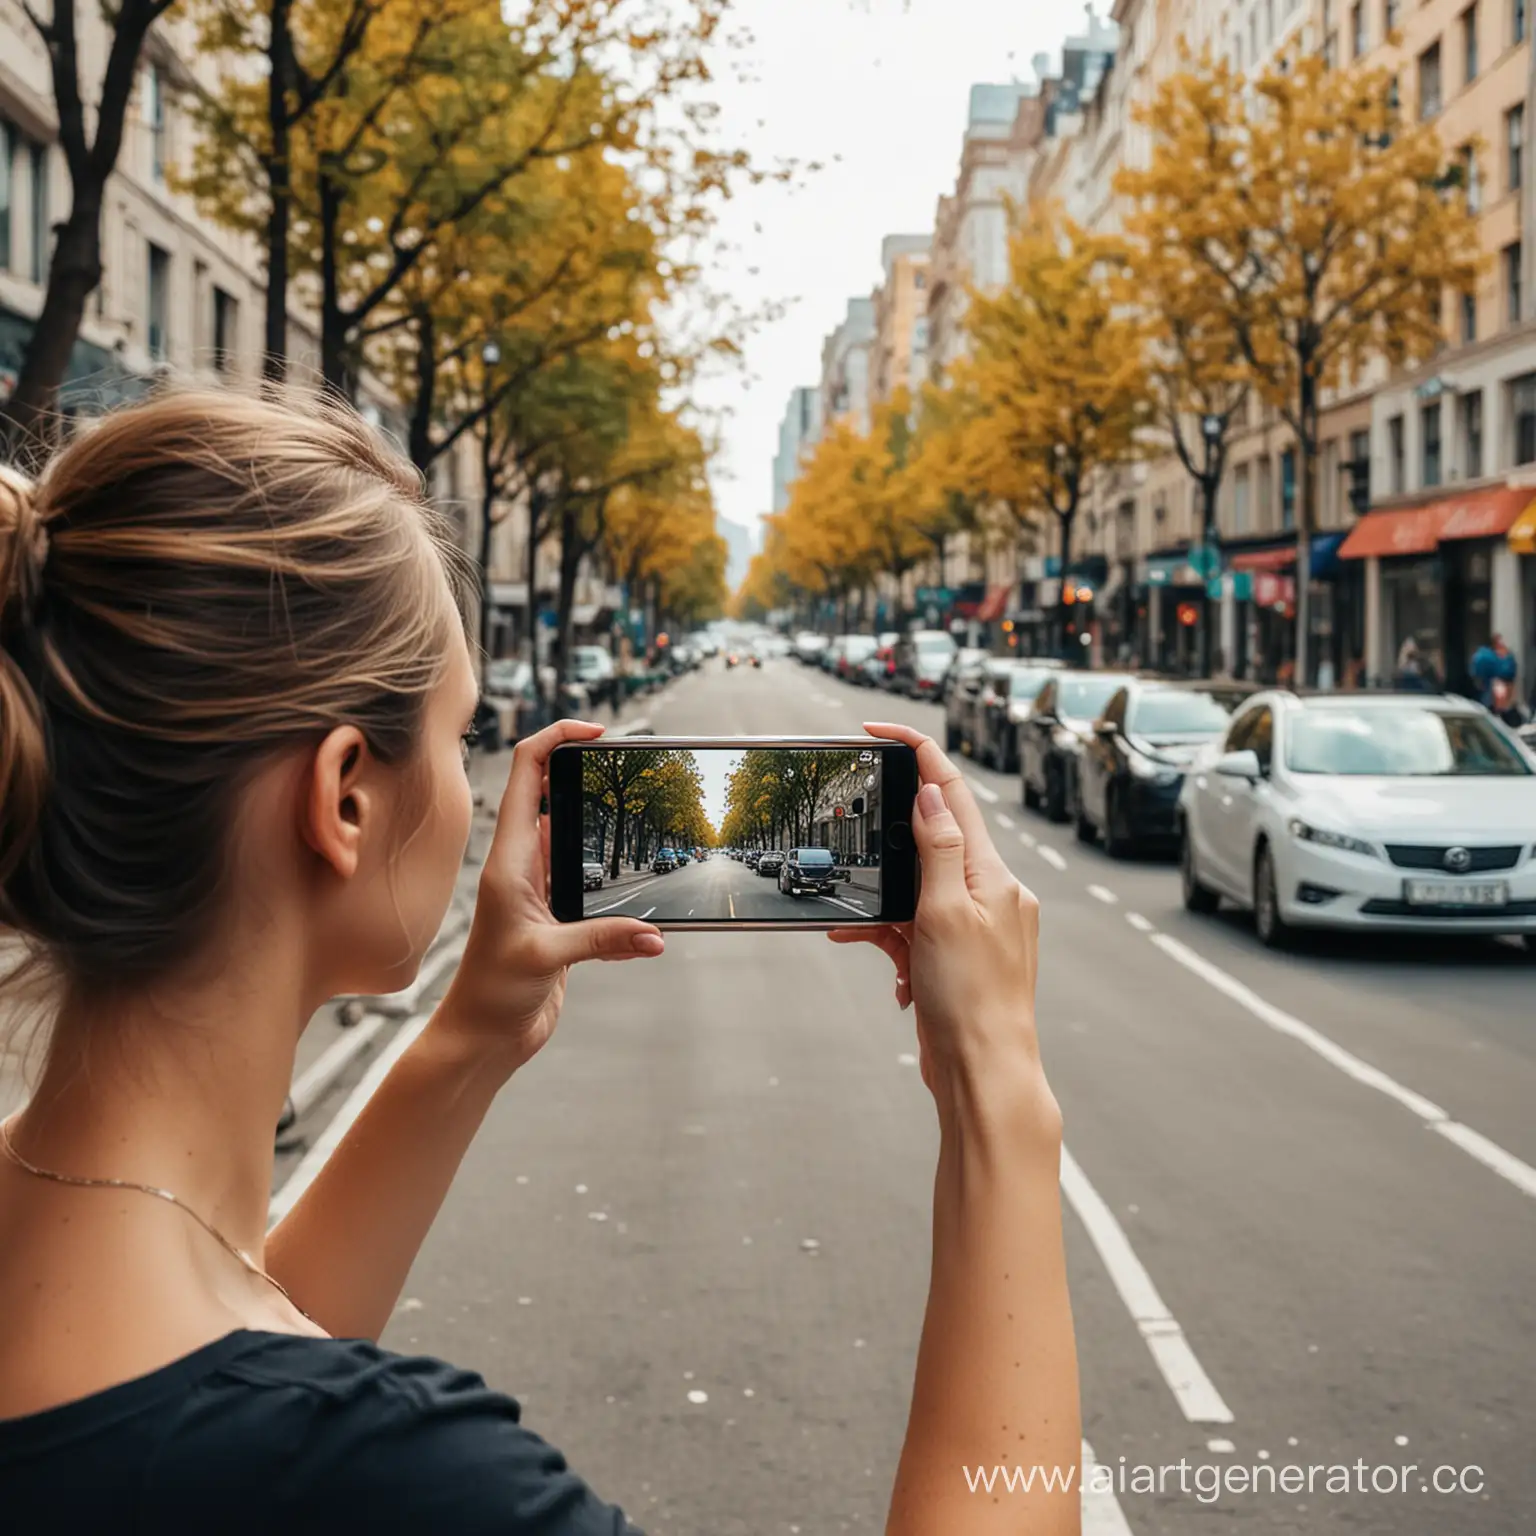 Girl-Filming-Video-on-City-Street-with-Trees-and-Cars